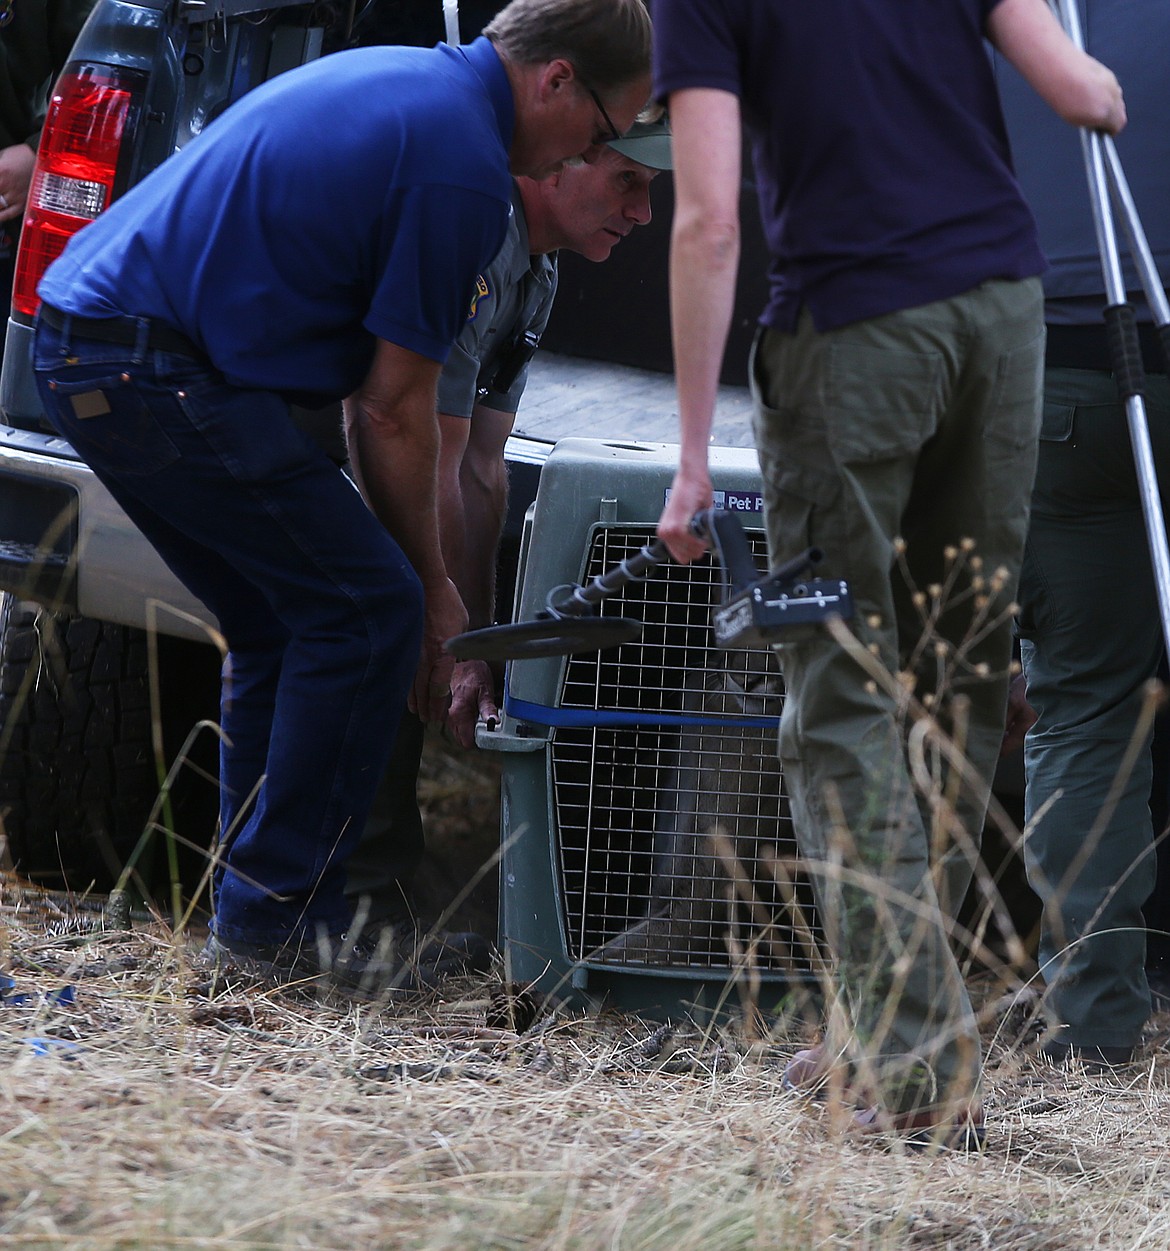 Biologists with Idaho Fish and Game remove a mountain lion from the 1100 block of Ironwood Drive Monday morning in Coeur d'Alene. The male cougar was seen walking across a parking lot and later climbed up a tree, where it was sedated by Coeur d&#146;Alene authorities. (LOREN BENOIT/Press)